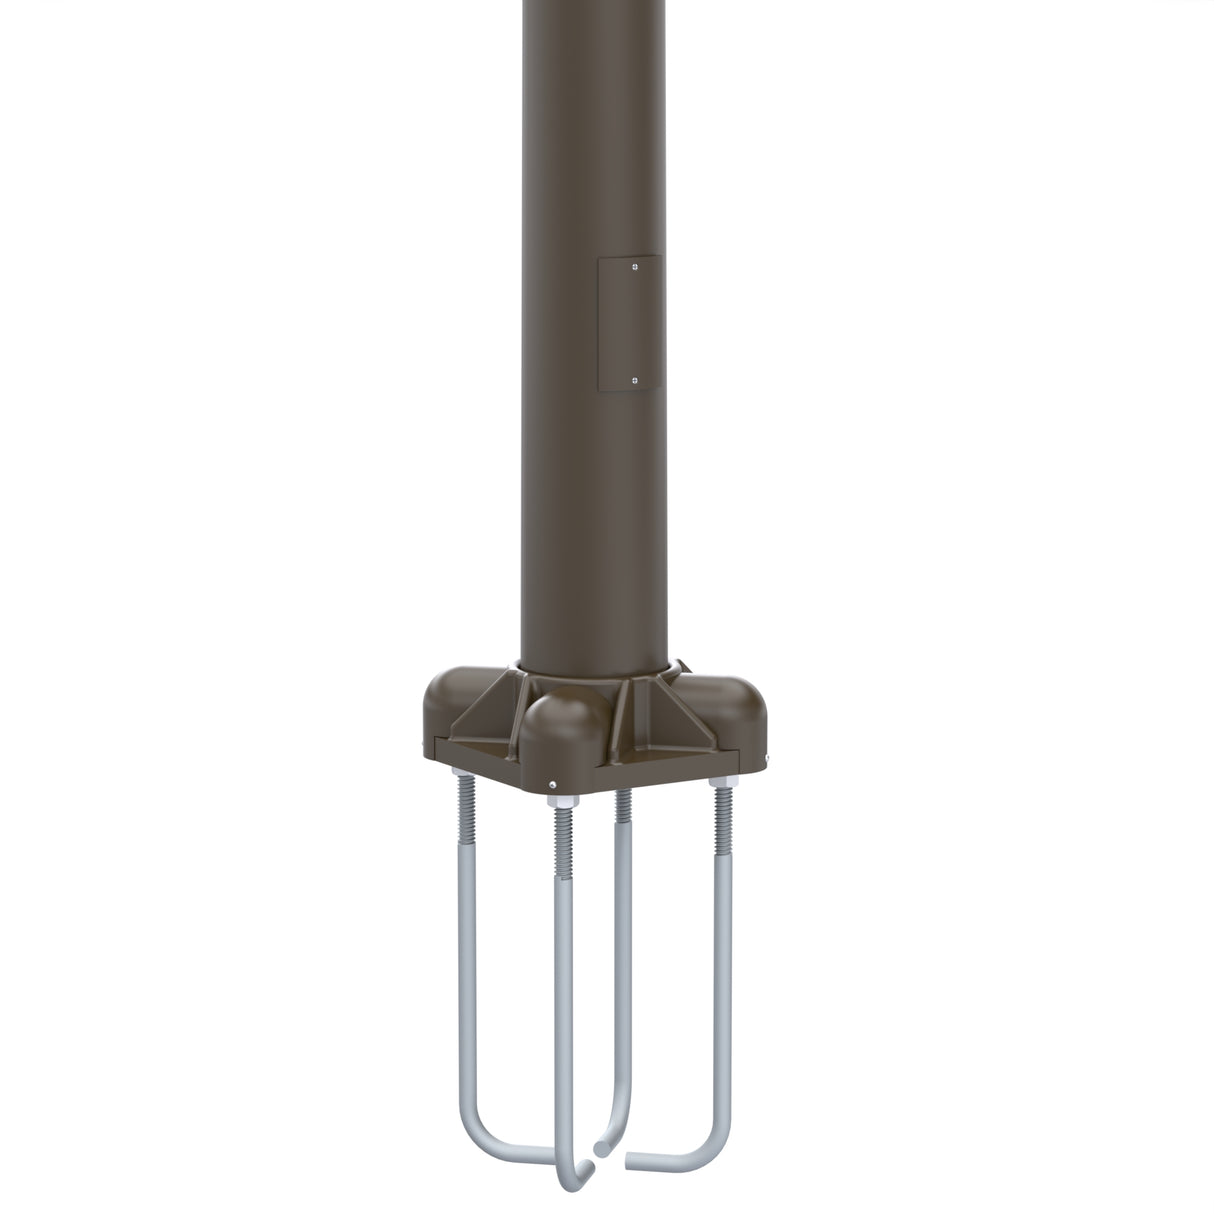 14' Tall x 5.0" Base OD x 3.0" Top OD x 0.125" Thick, Round Tapered Aluminum, Anchor Base Light Pole